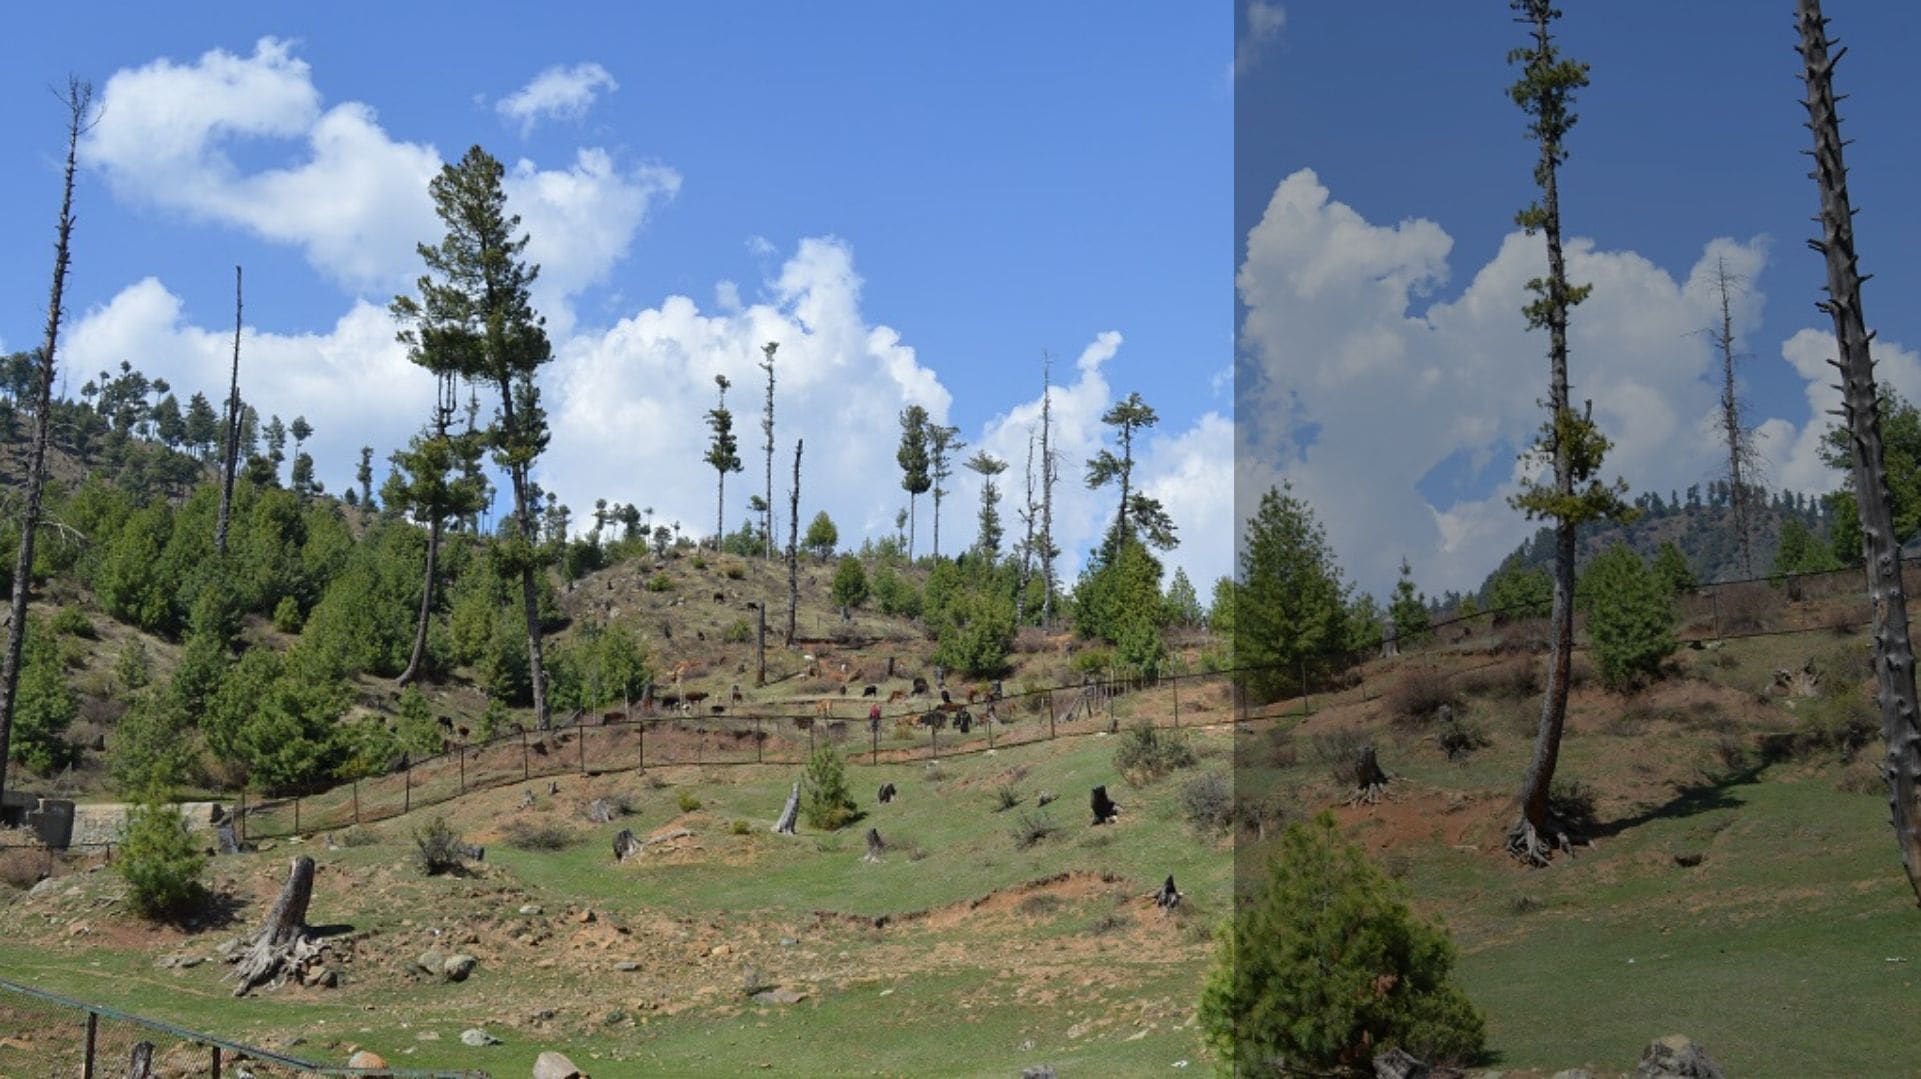 Part of a degraded forest in north Kashmir's Bandipora district (Photo --- Athar Parvaiz)